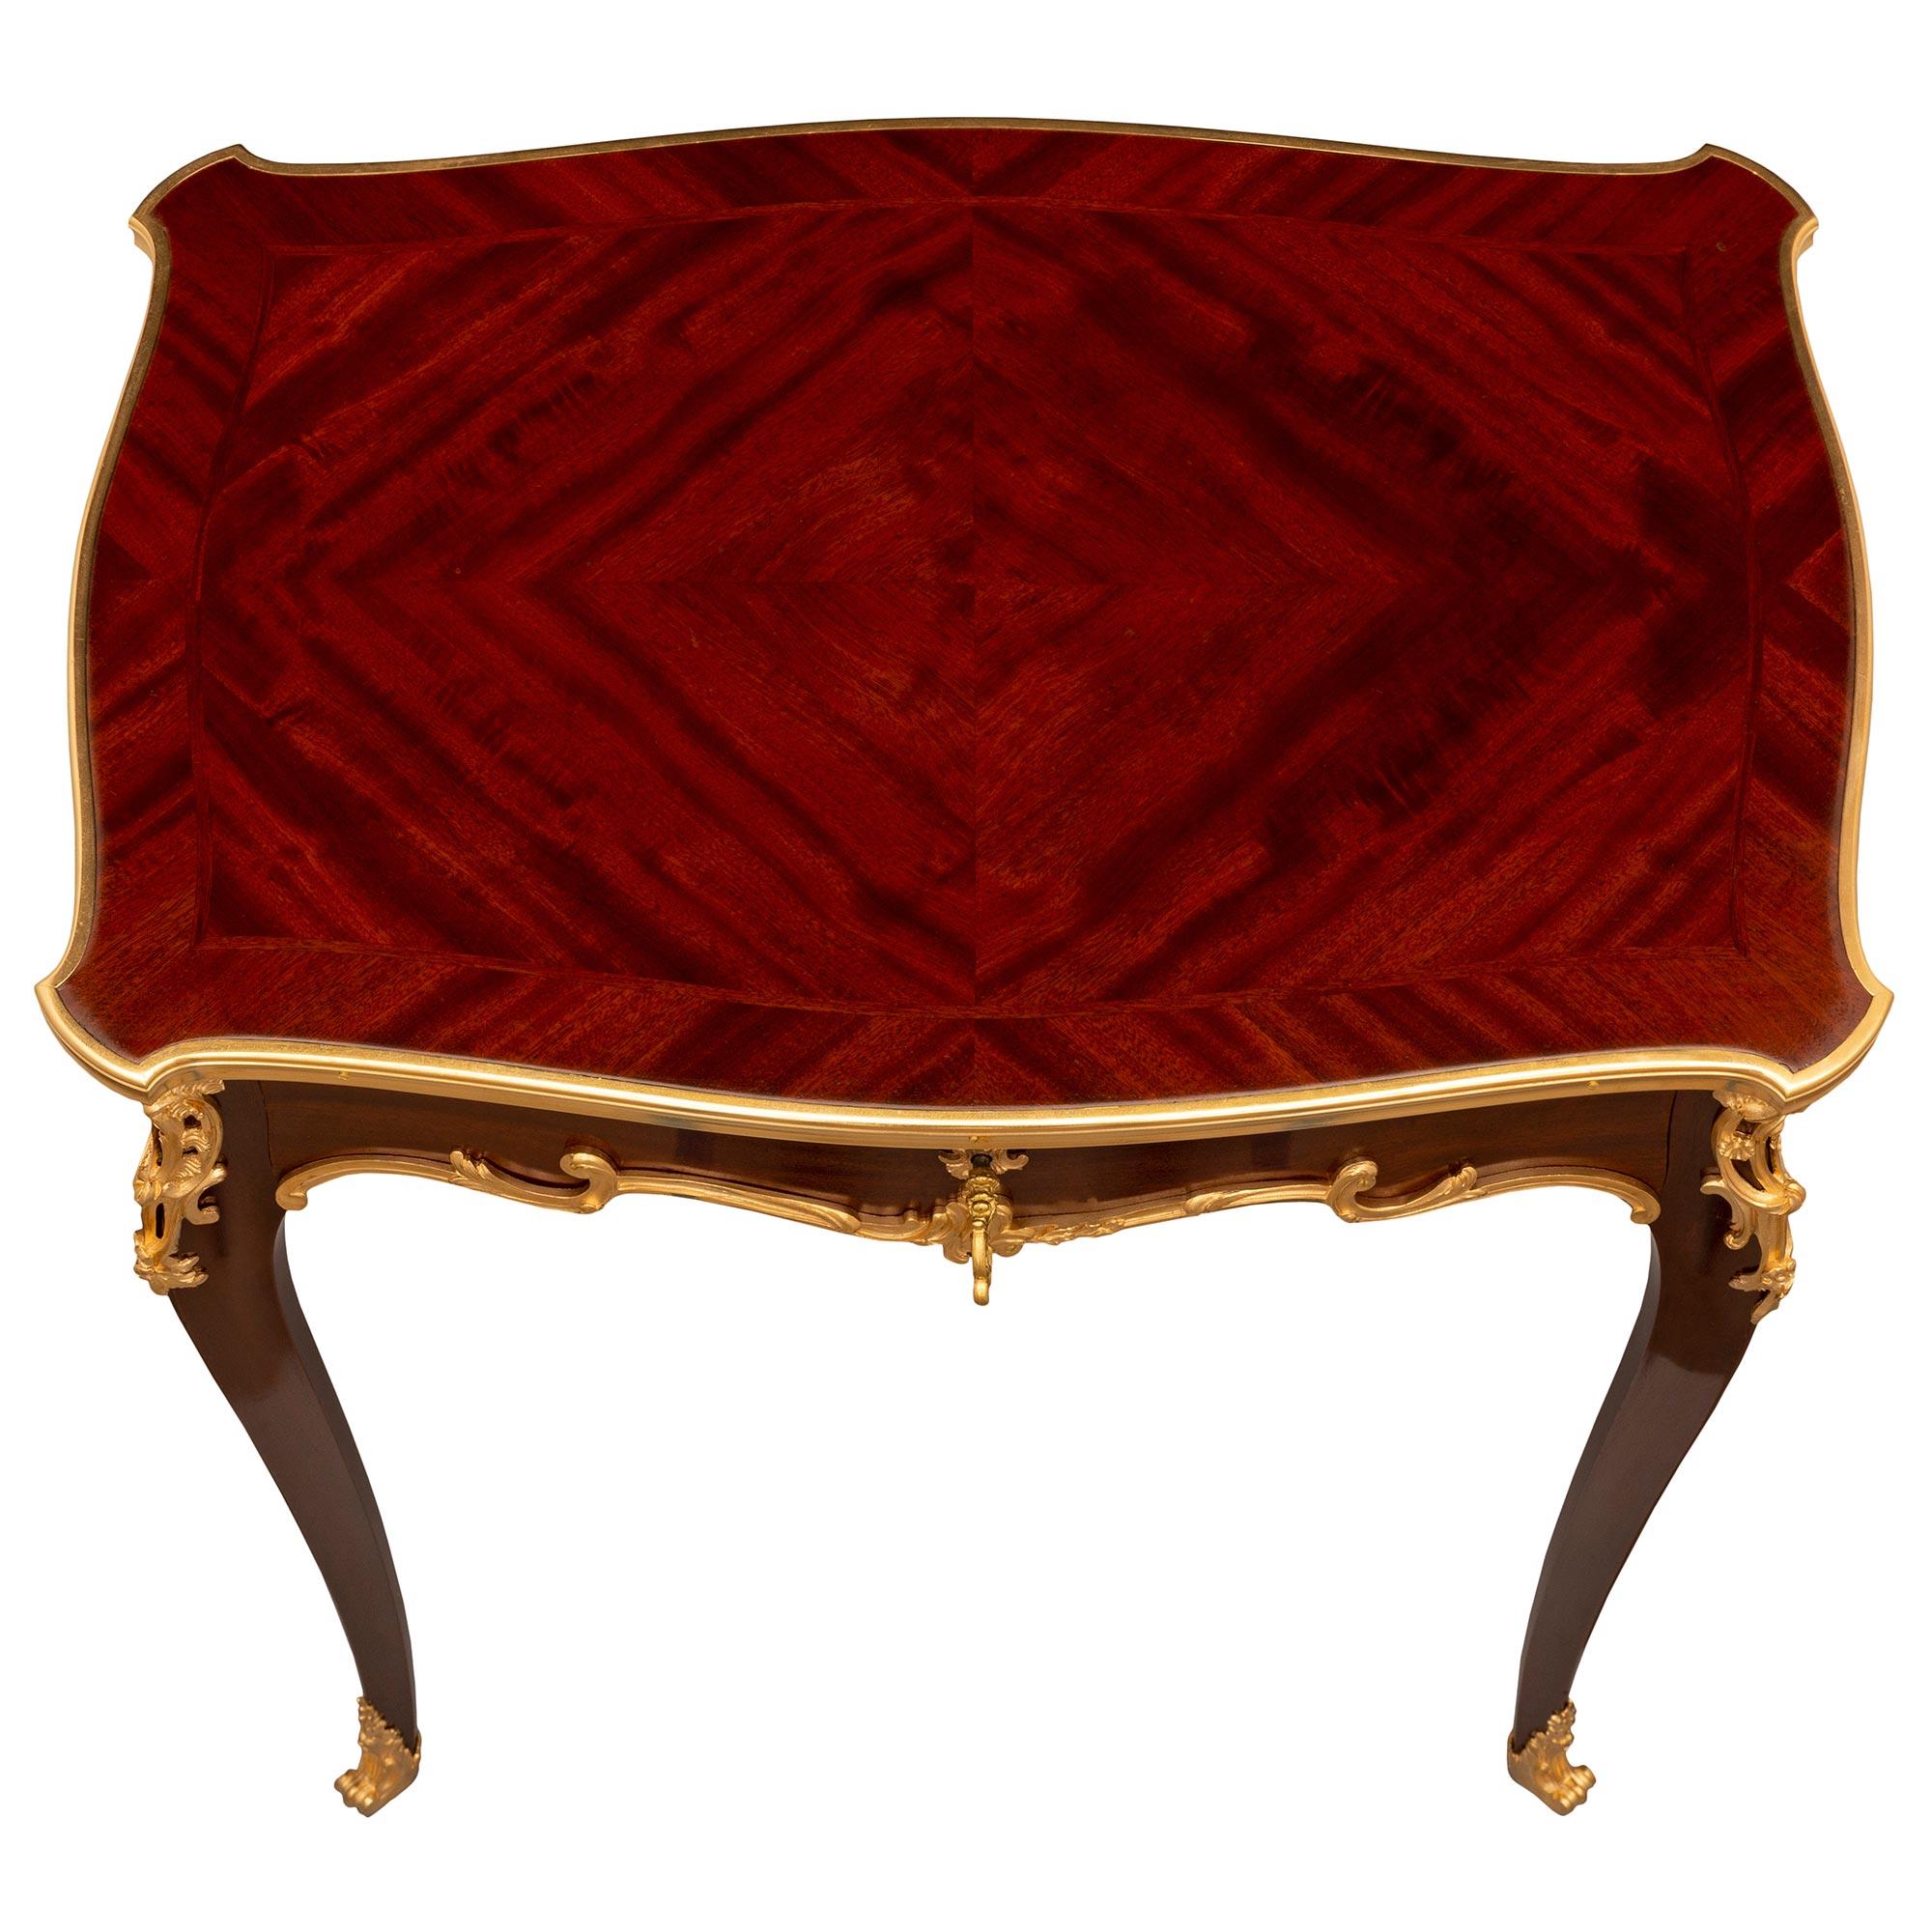 A splendid French 19th century Louis XV st. Mahogany and ormolu side table attributed to Sormani. The table is raised by elegant tapered cabriole legs with fine fitted foliate ormolu sabots and richly chased pierced corner mounts in a striking satin